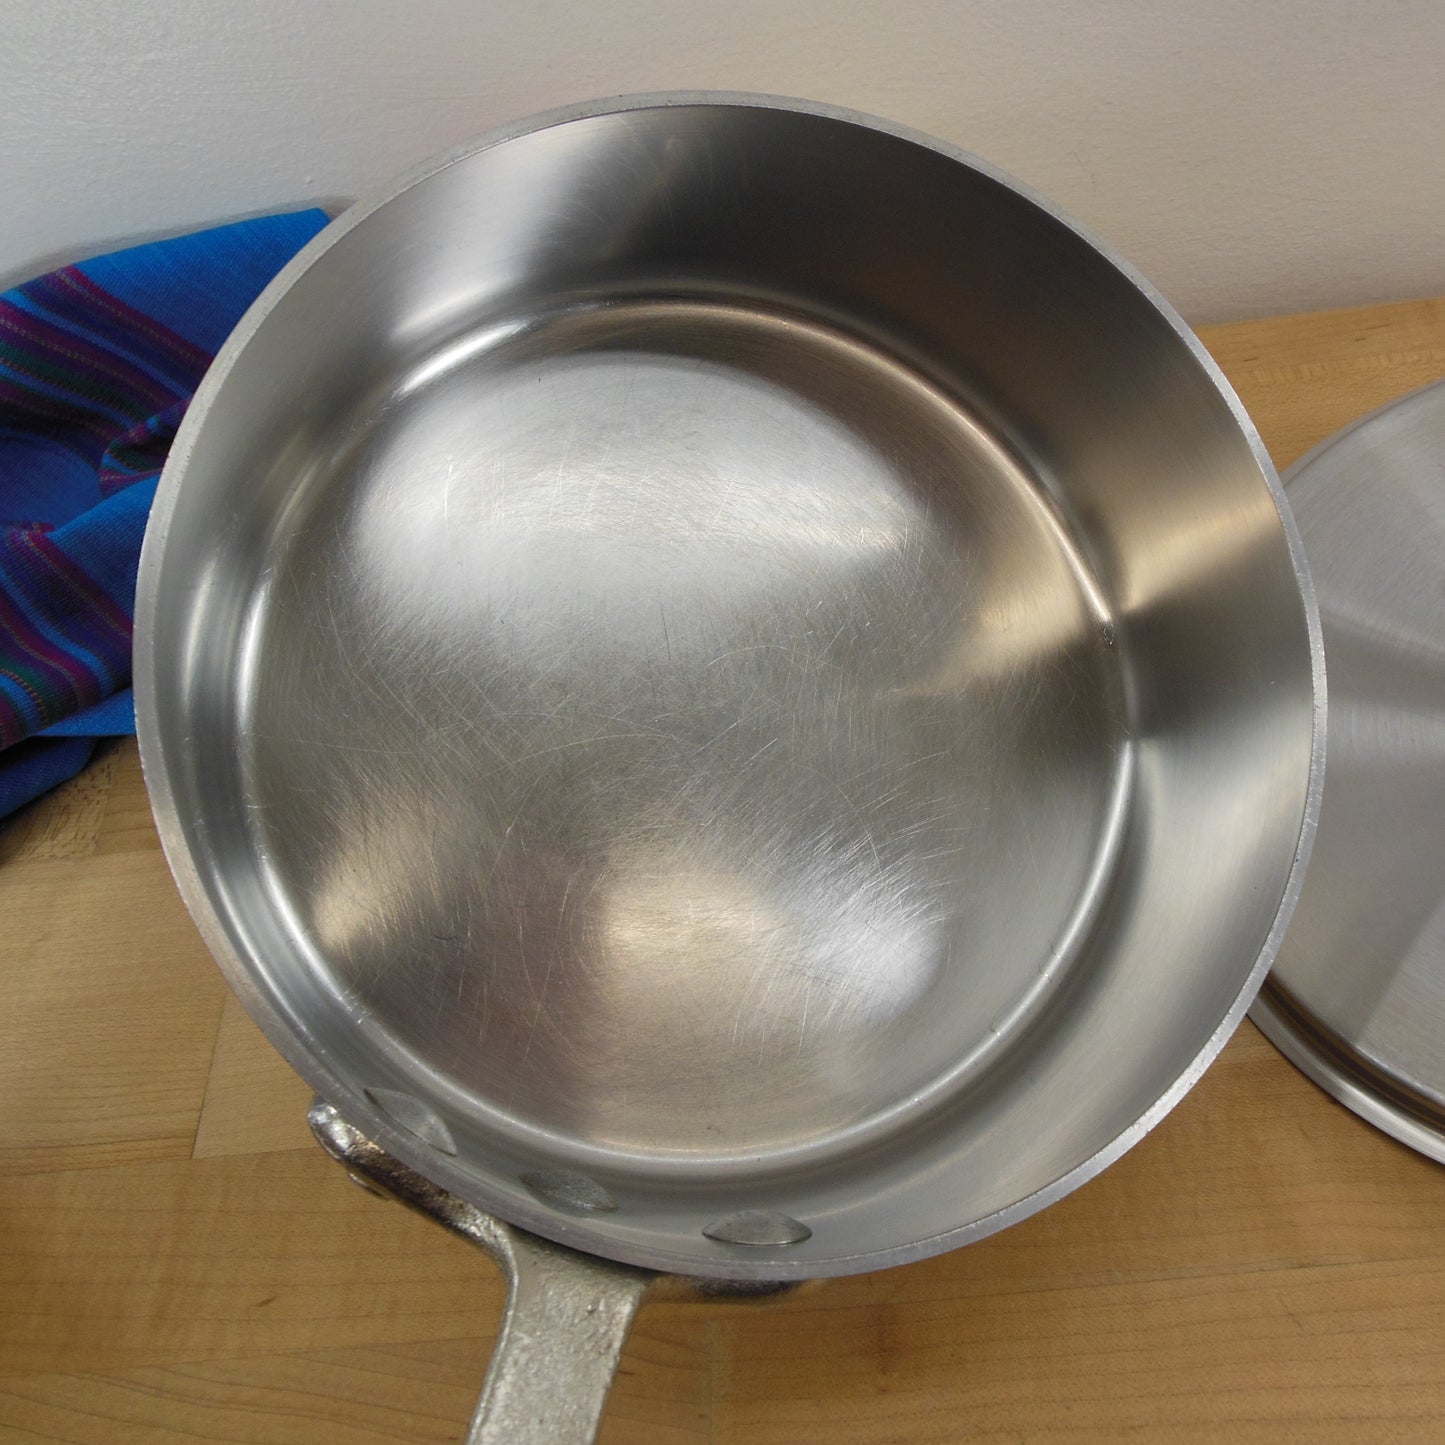 All-Clad Metal Crafters Master Chef 2-1/2 Quart Saucepan 202 1/2 Used